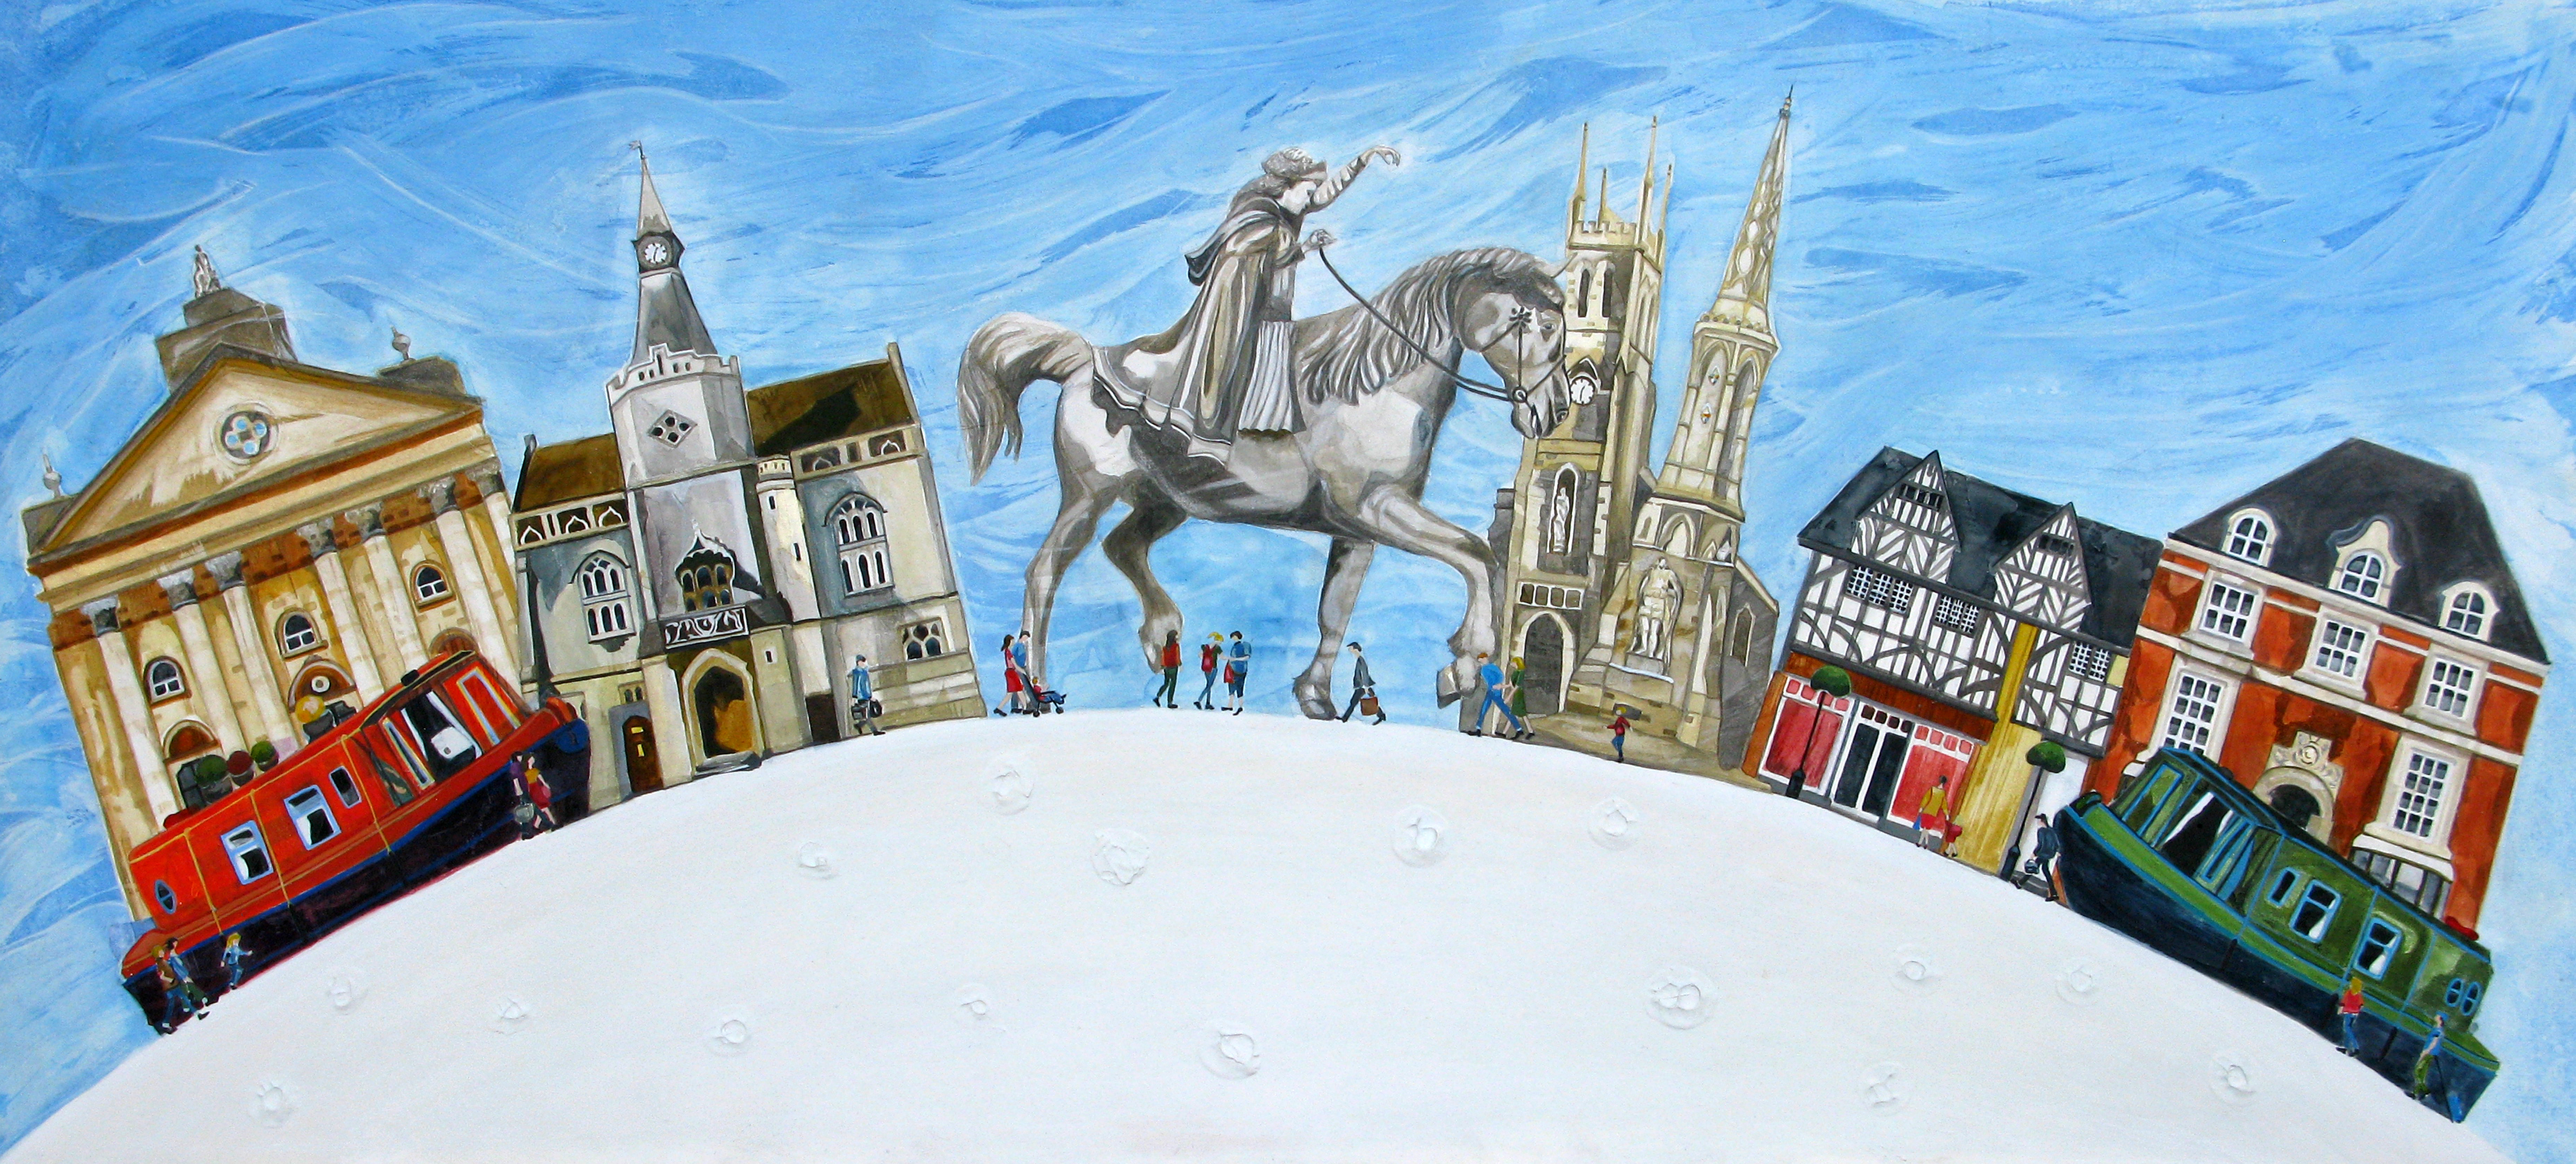 Over The Moon with Banbury. A Giclee Limited Edtion Print by Anya Simmons.